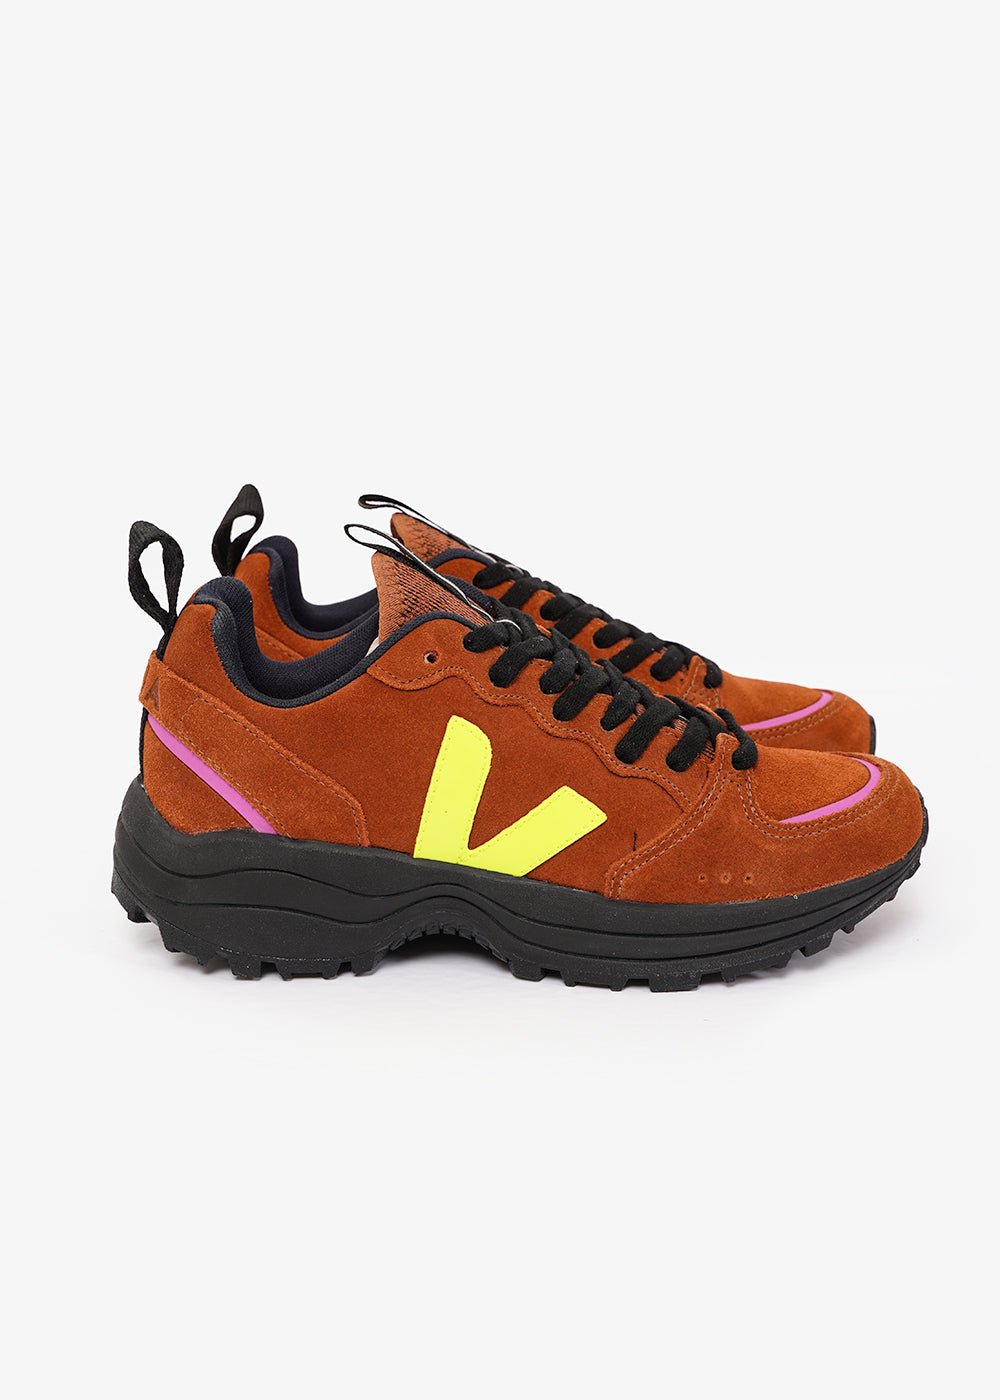 Veja Jaune Fluo Venturi Sneakers — Shop sustainable fashion and slow fashion at New Classics Studios